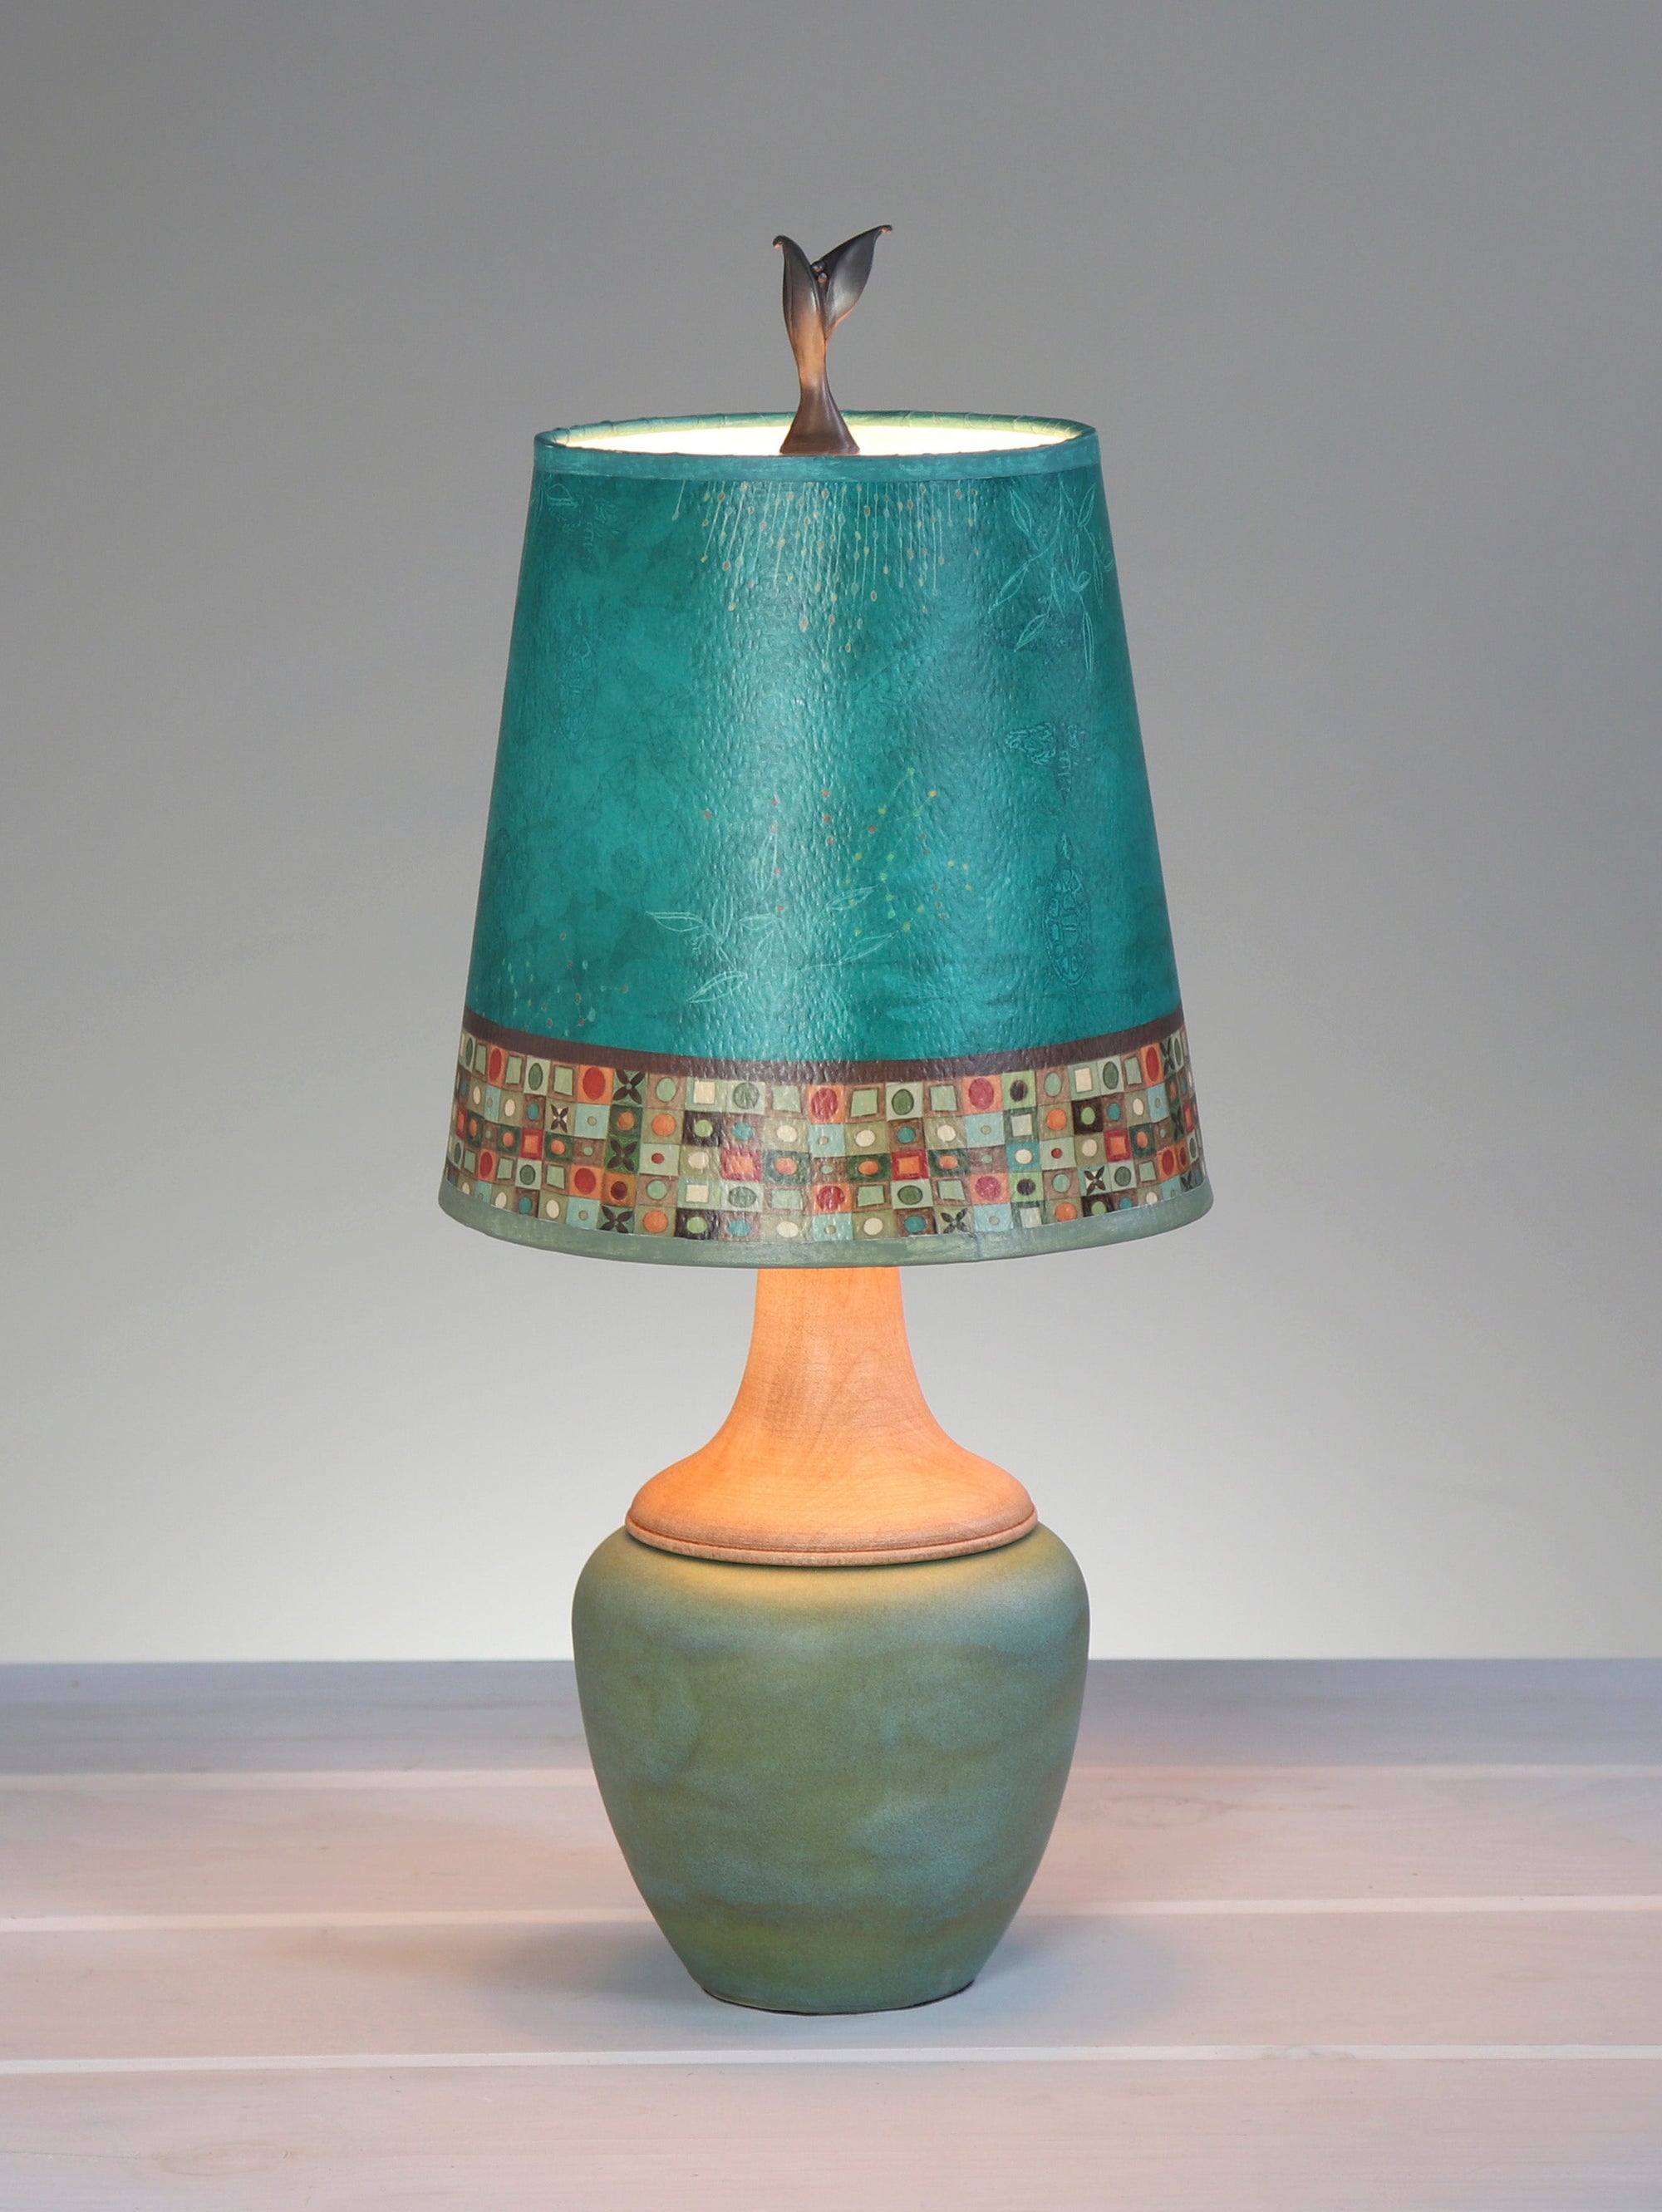 Janna Ugone & Co Table Lamps Ceramic and Maple Table Lamp with Small Drum Shade in Jade Mosaic